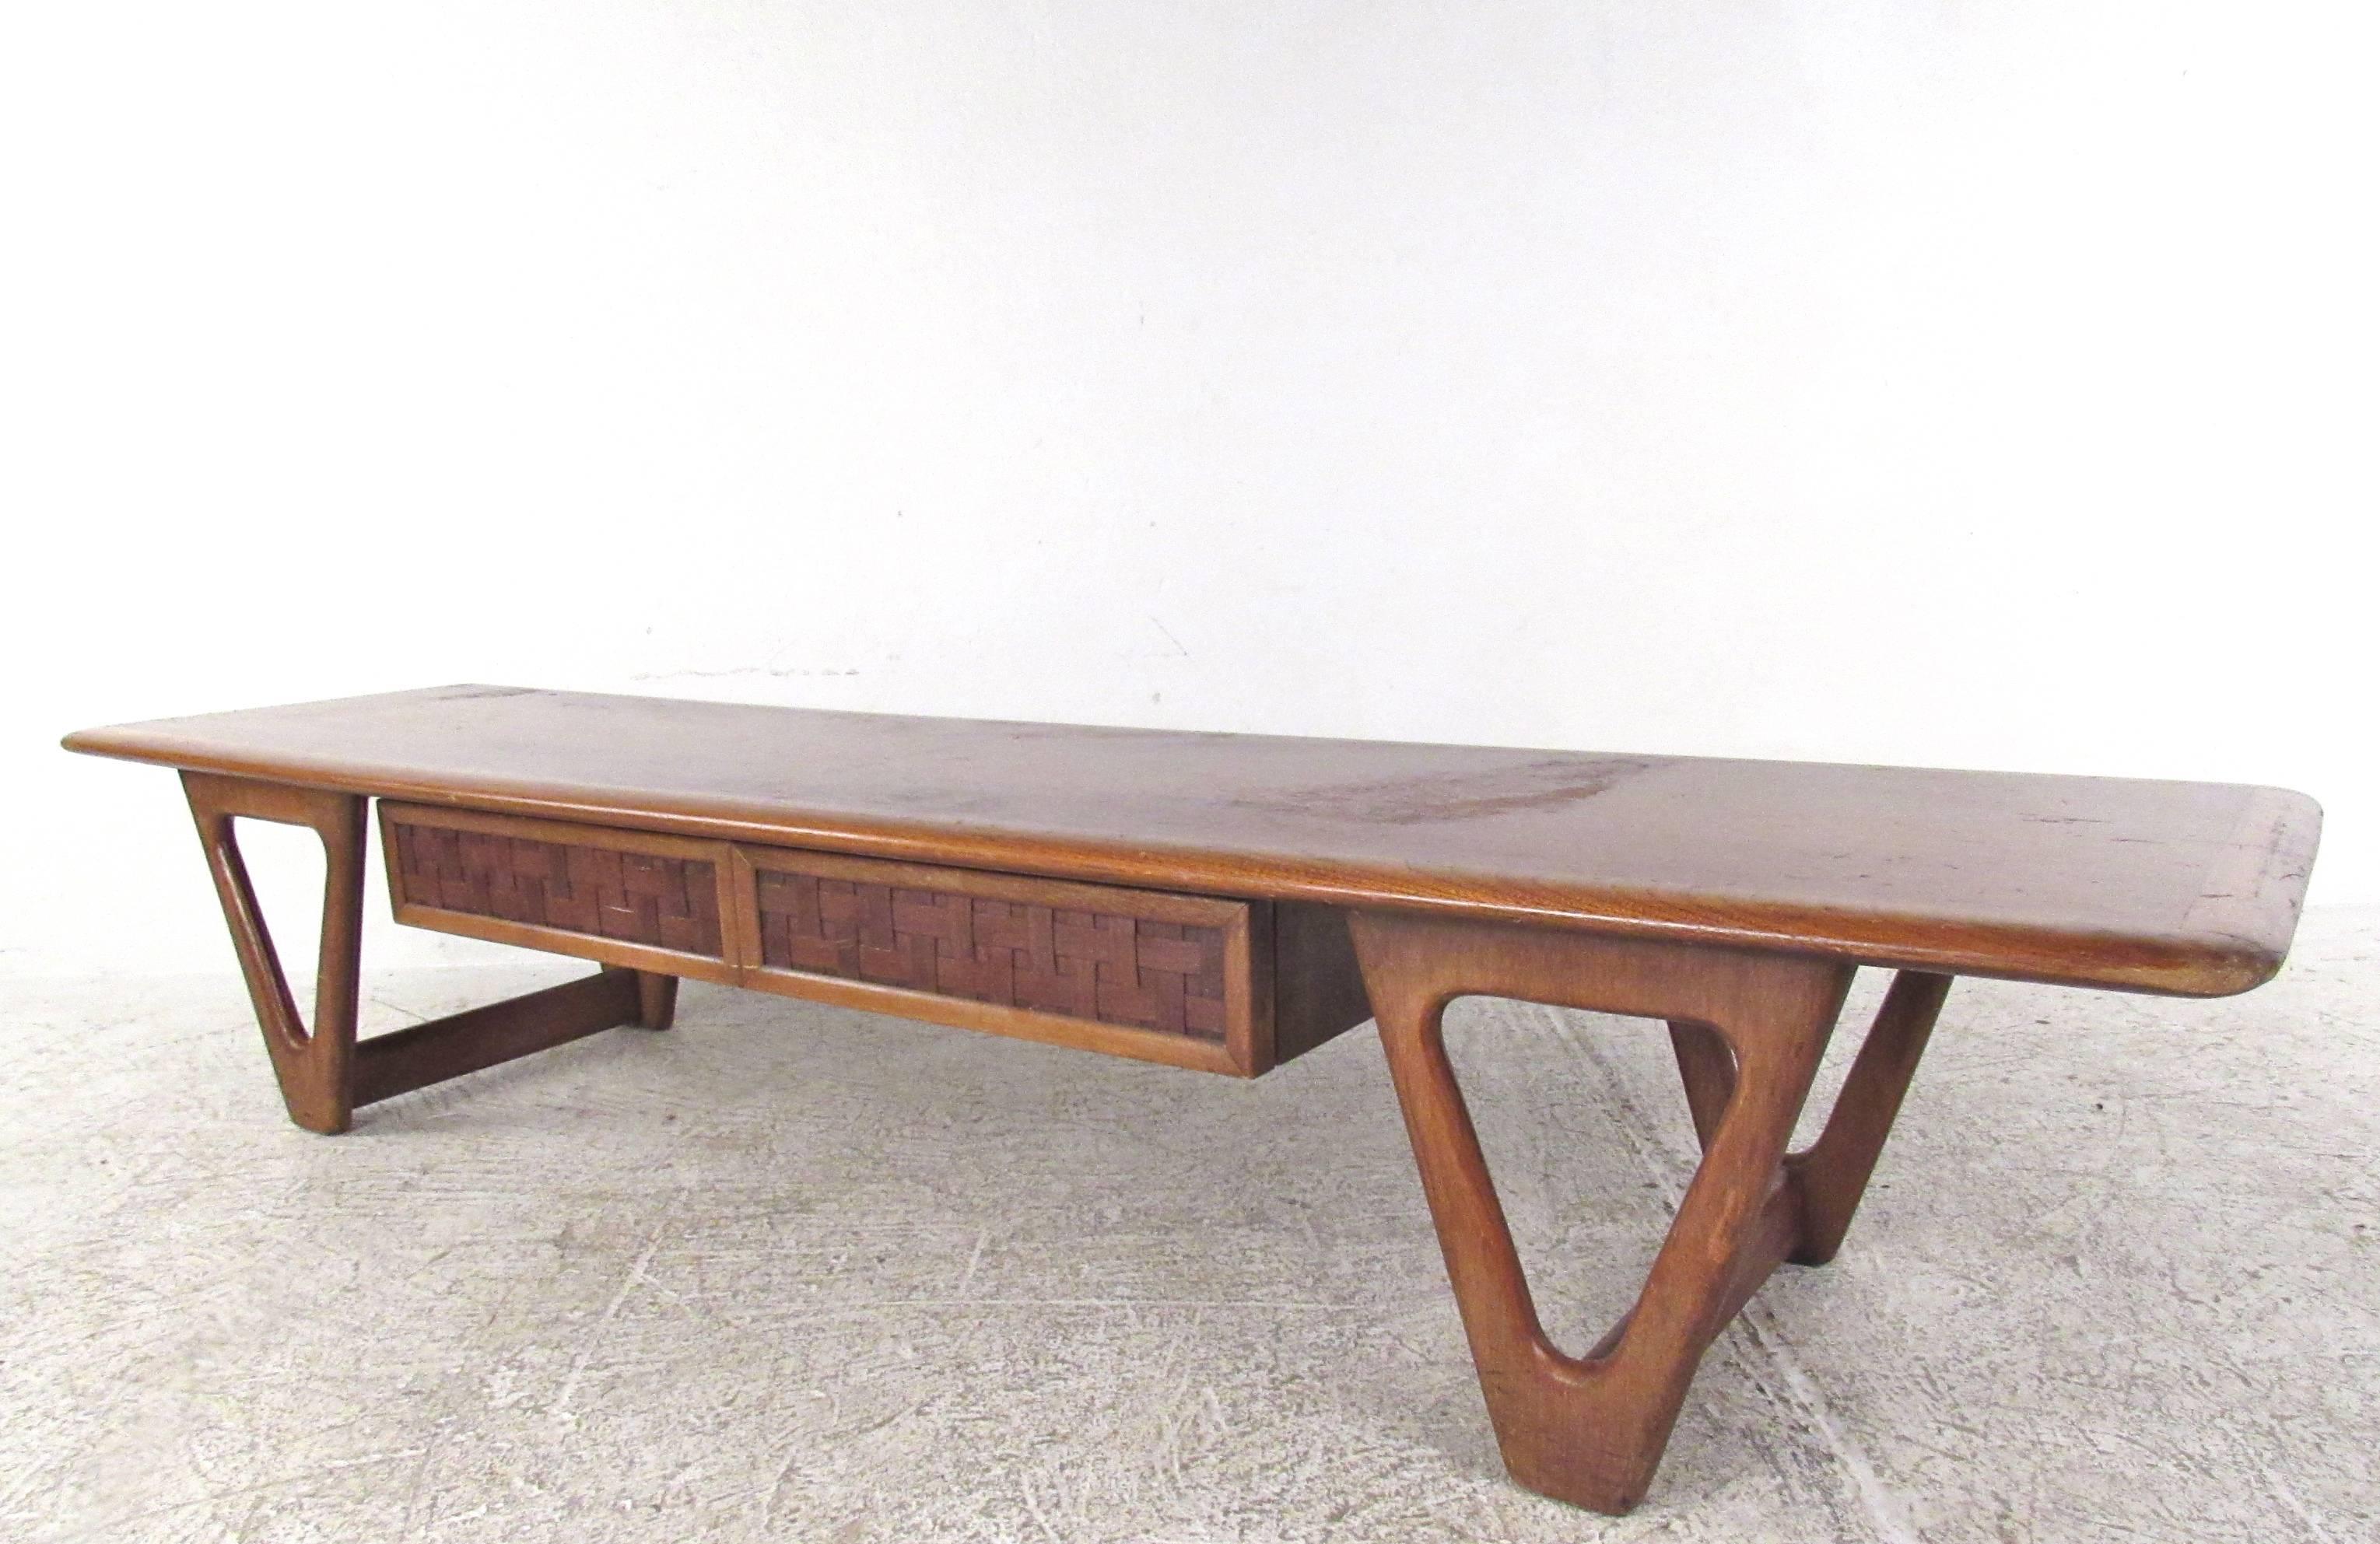 This uniquely sculpted coffee table features a single drawer with basket woven details, as well as a stylish table base. Oak banded top further showcases Warren Church's iconic design prowess. Please confirm item location (NY or NJ).